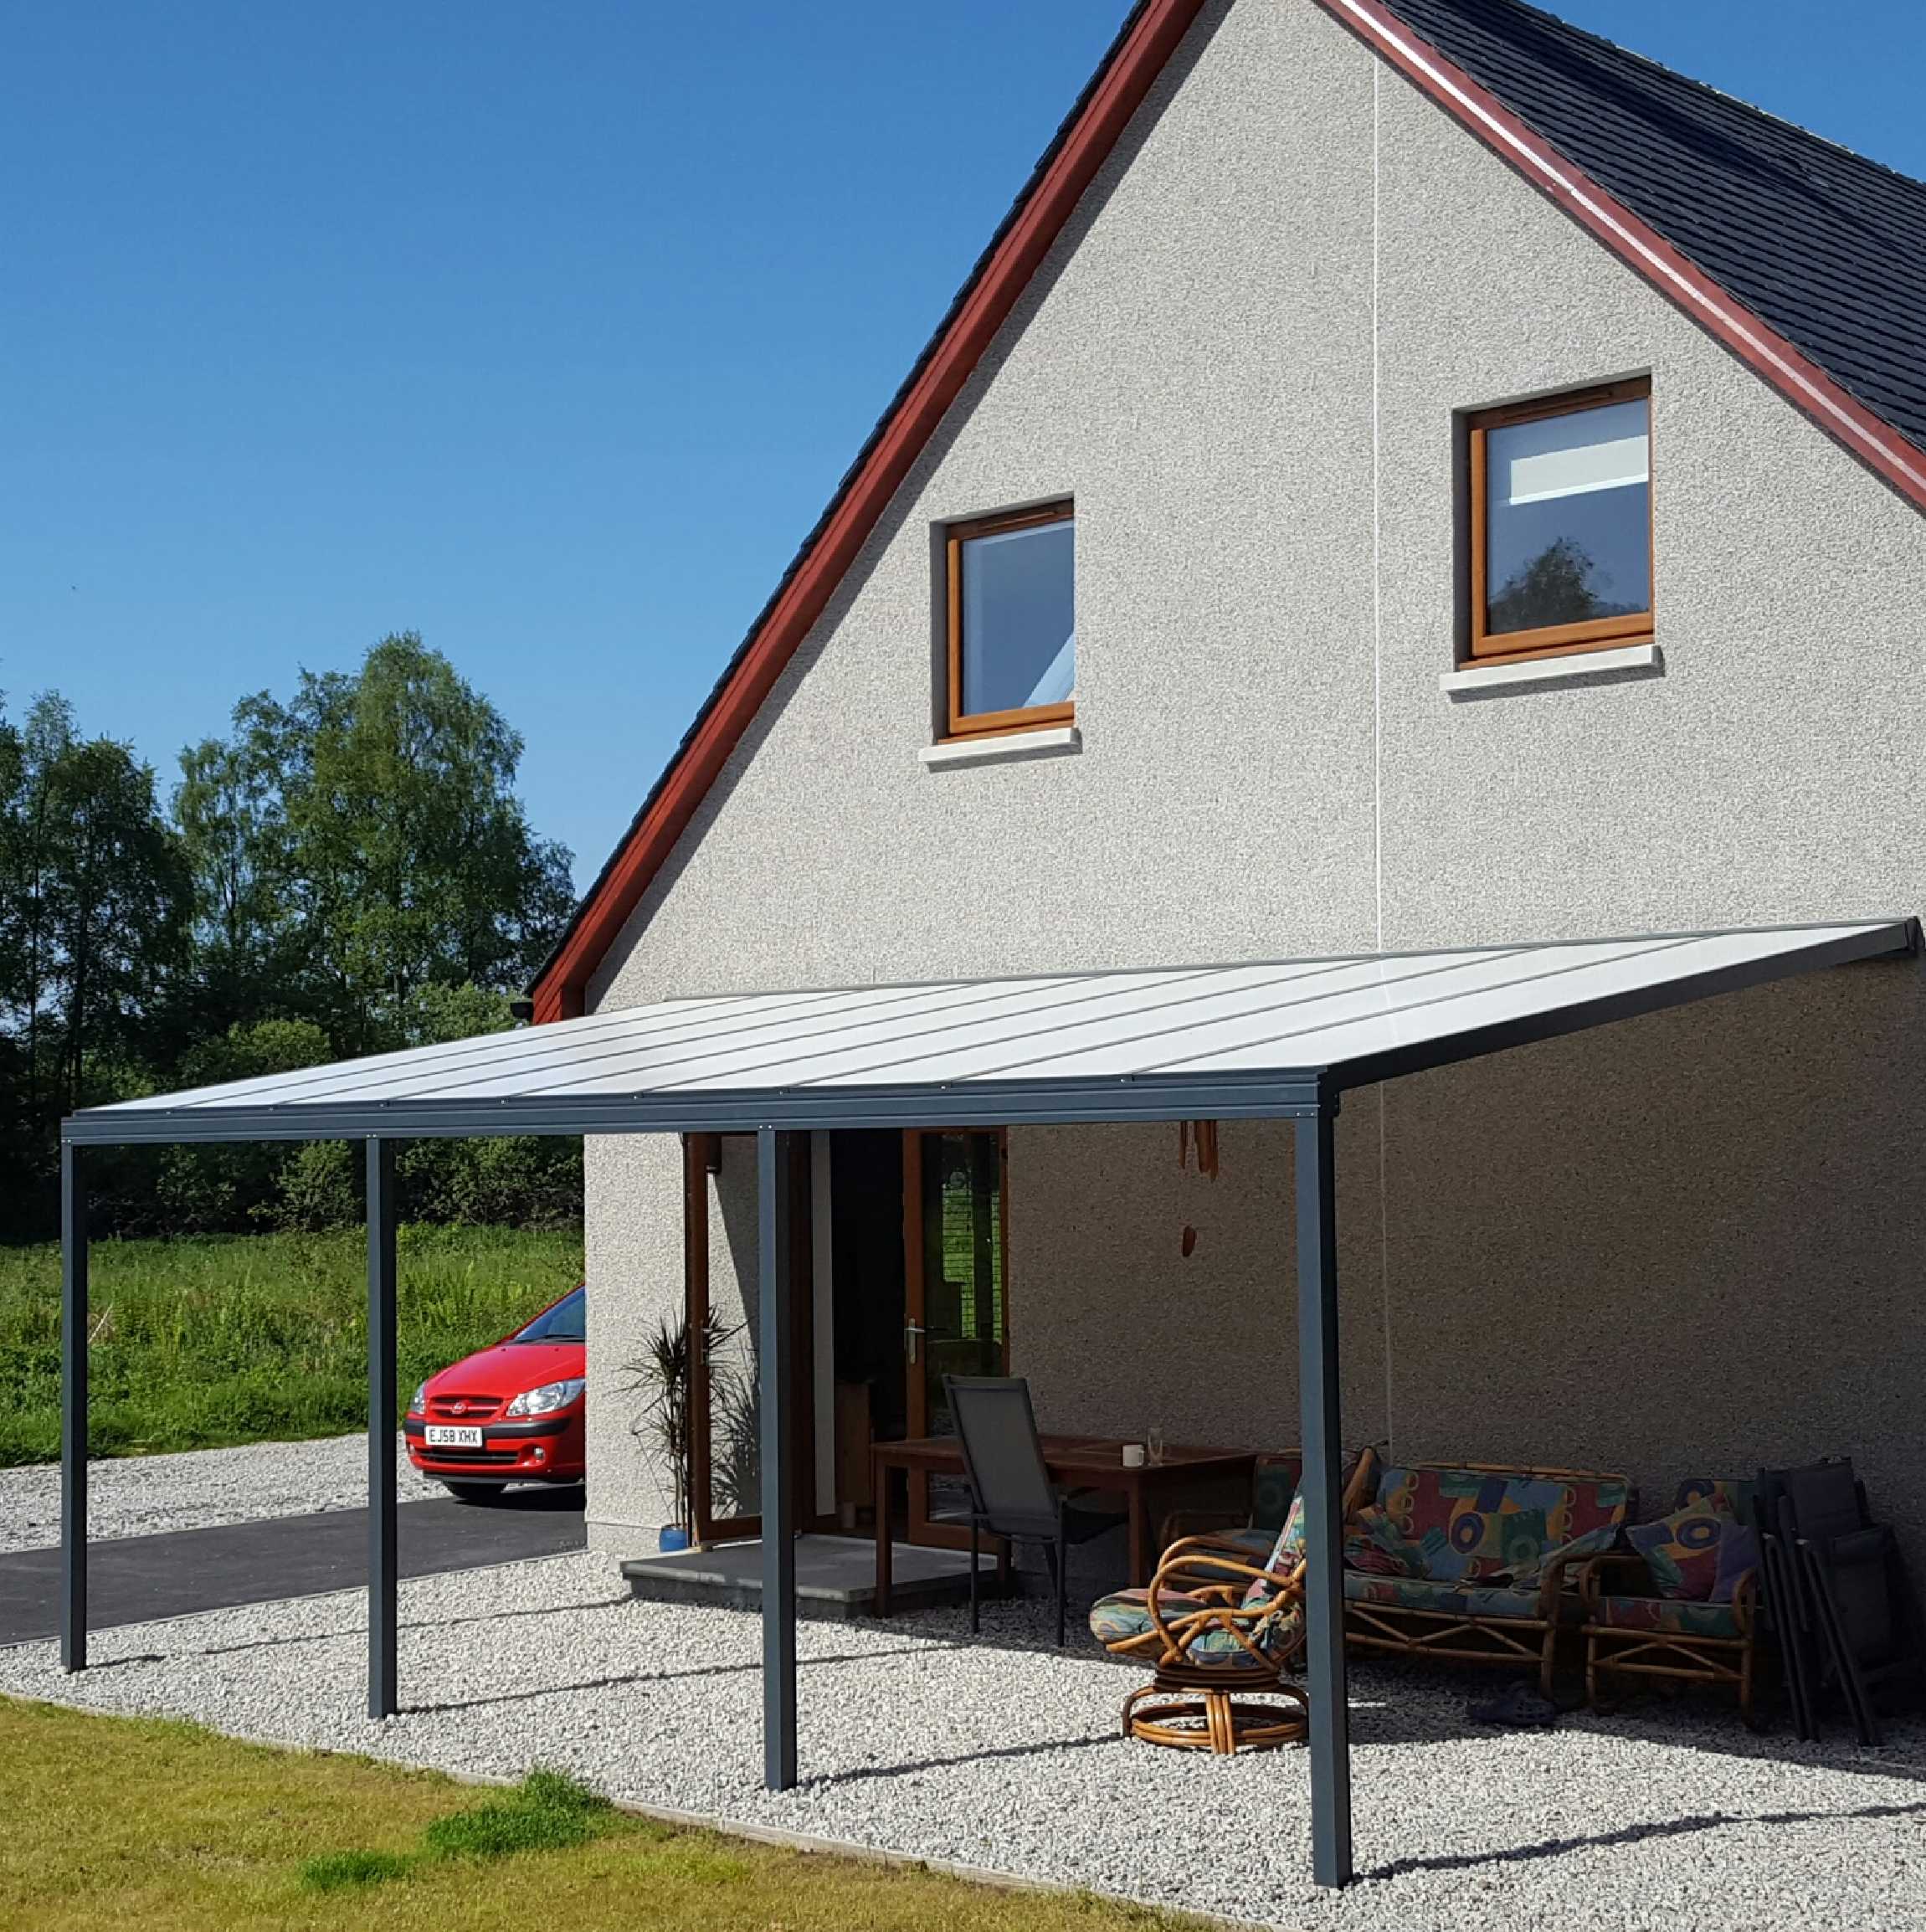 Great selection of SPECIAL OFFER Omega Smart Lean-To Canopy, Anthracite Grey, 16mm Polycarbonate Glazing - 2.5m (W) x 1.5m (P), (2) Supporting Posts